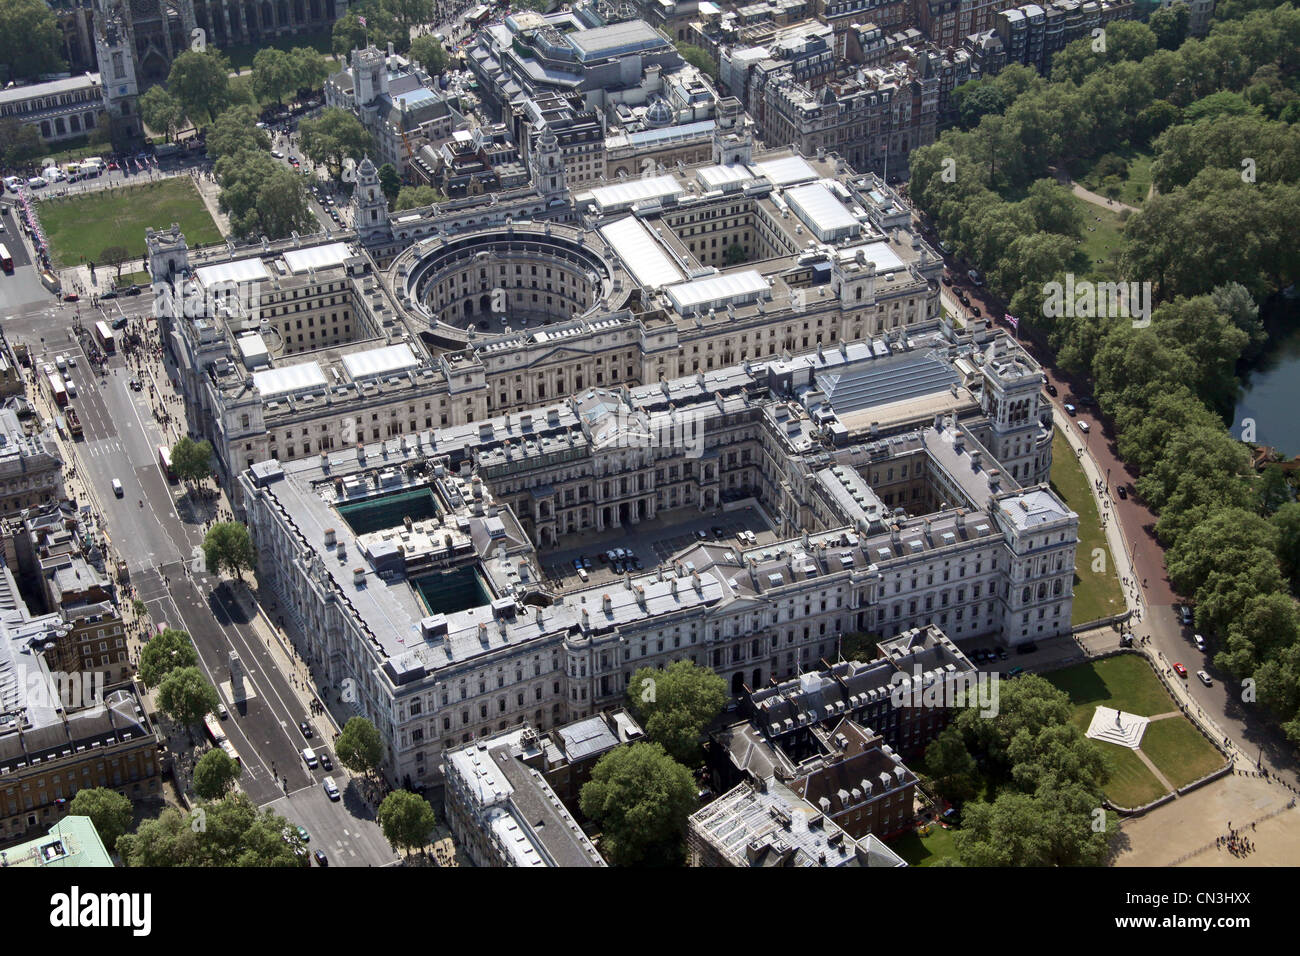 Aerial view of 10 Downing Street, Treasury Buildings, The FCO, Government Offices, Cabinet Office, Whitehall, London Stock Photo